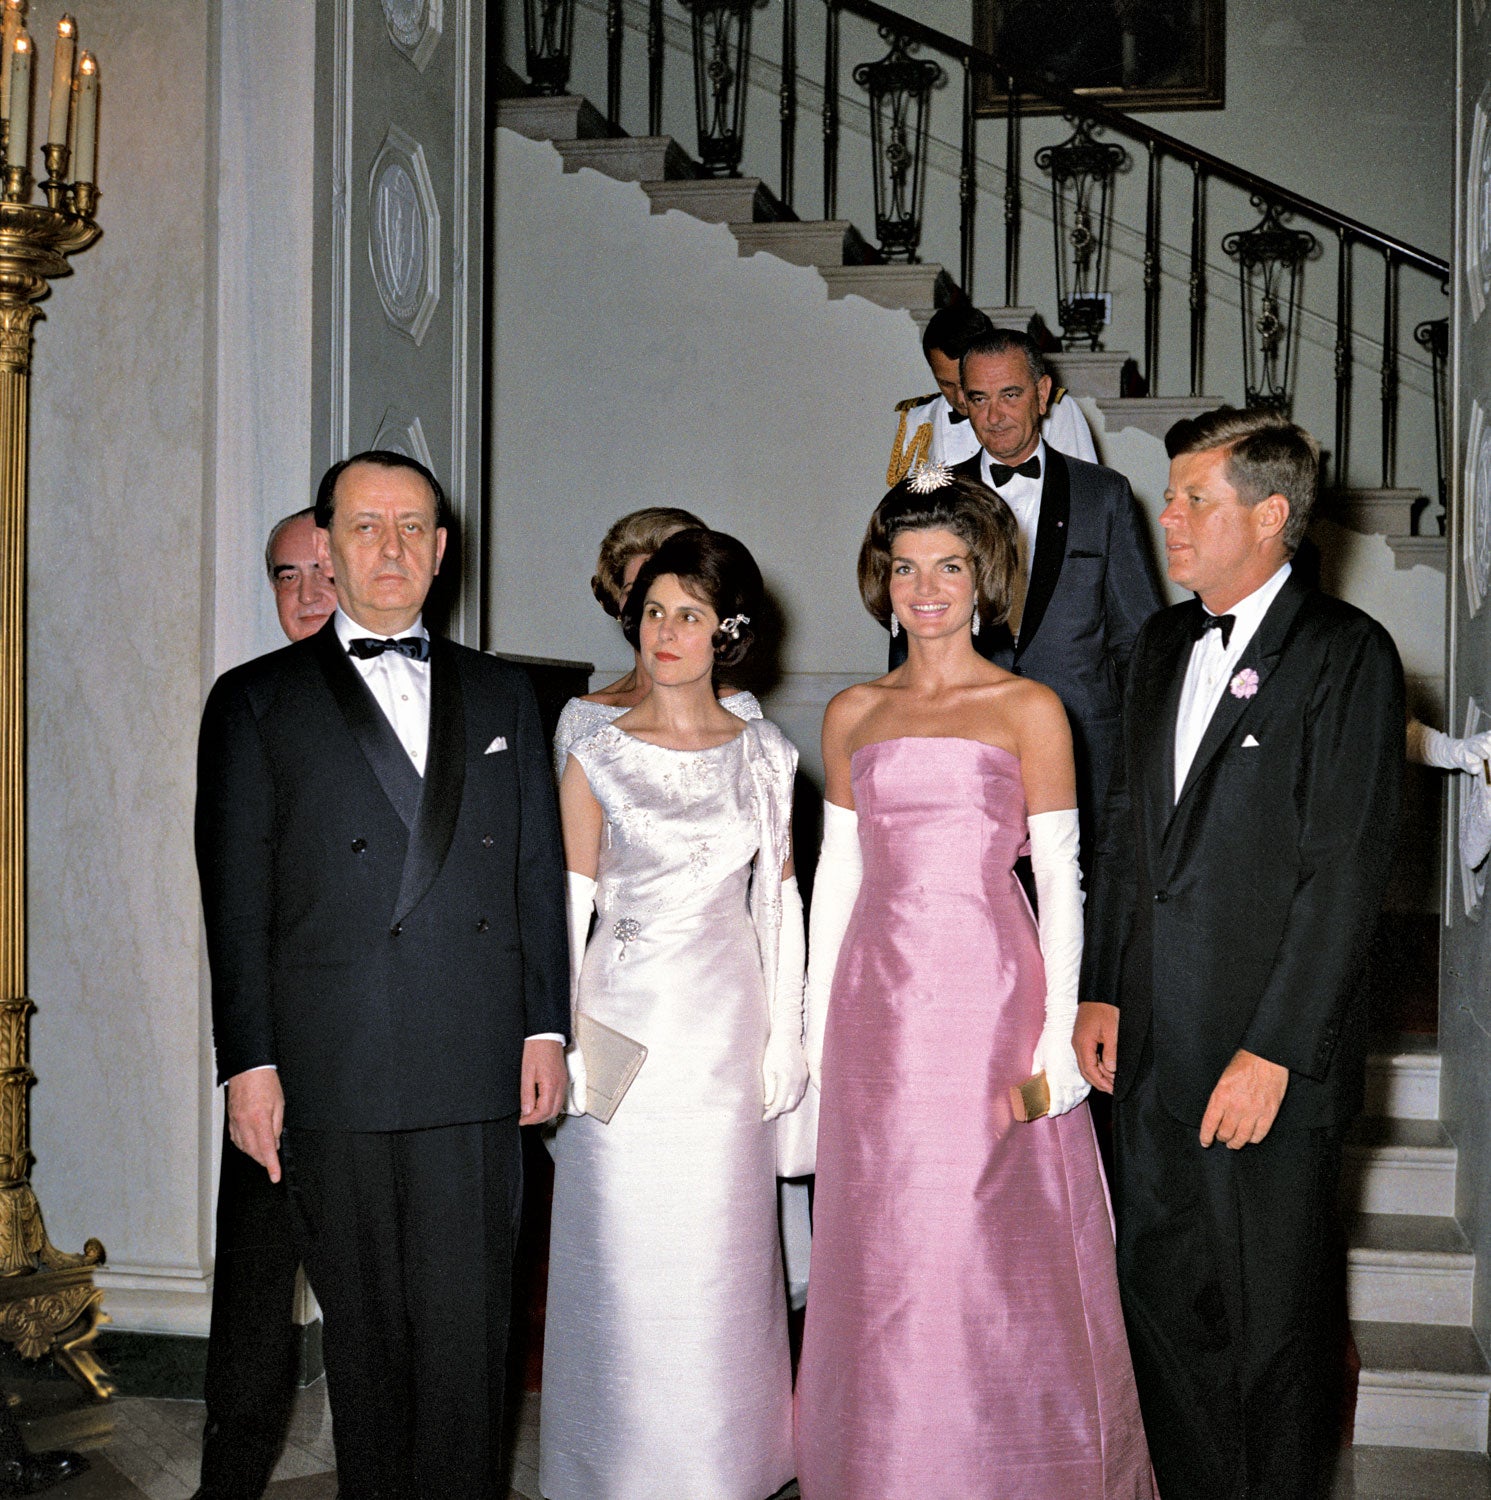 The “Jackie Look”: Fashioning the First Lady’s Image